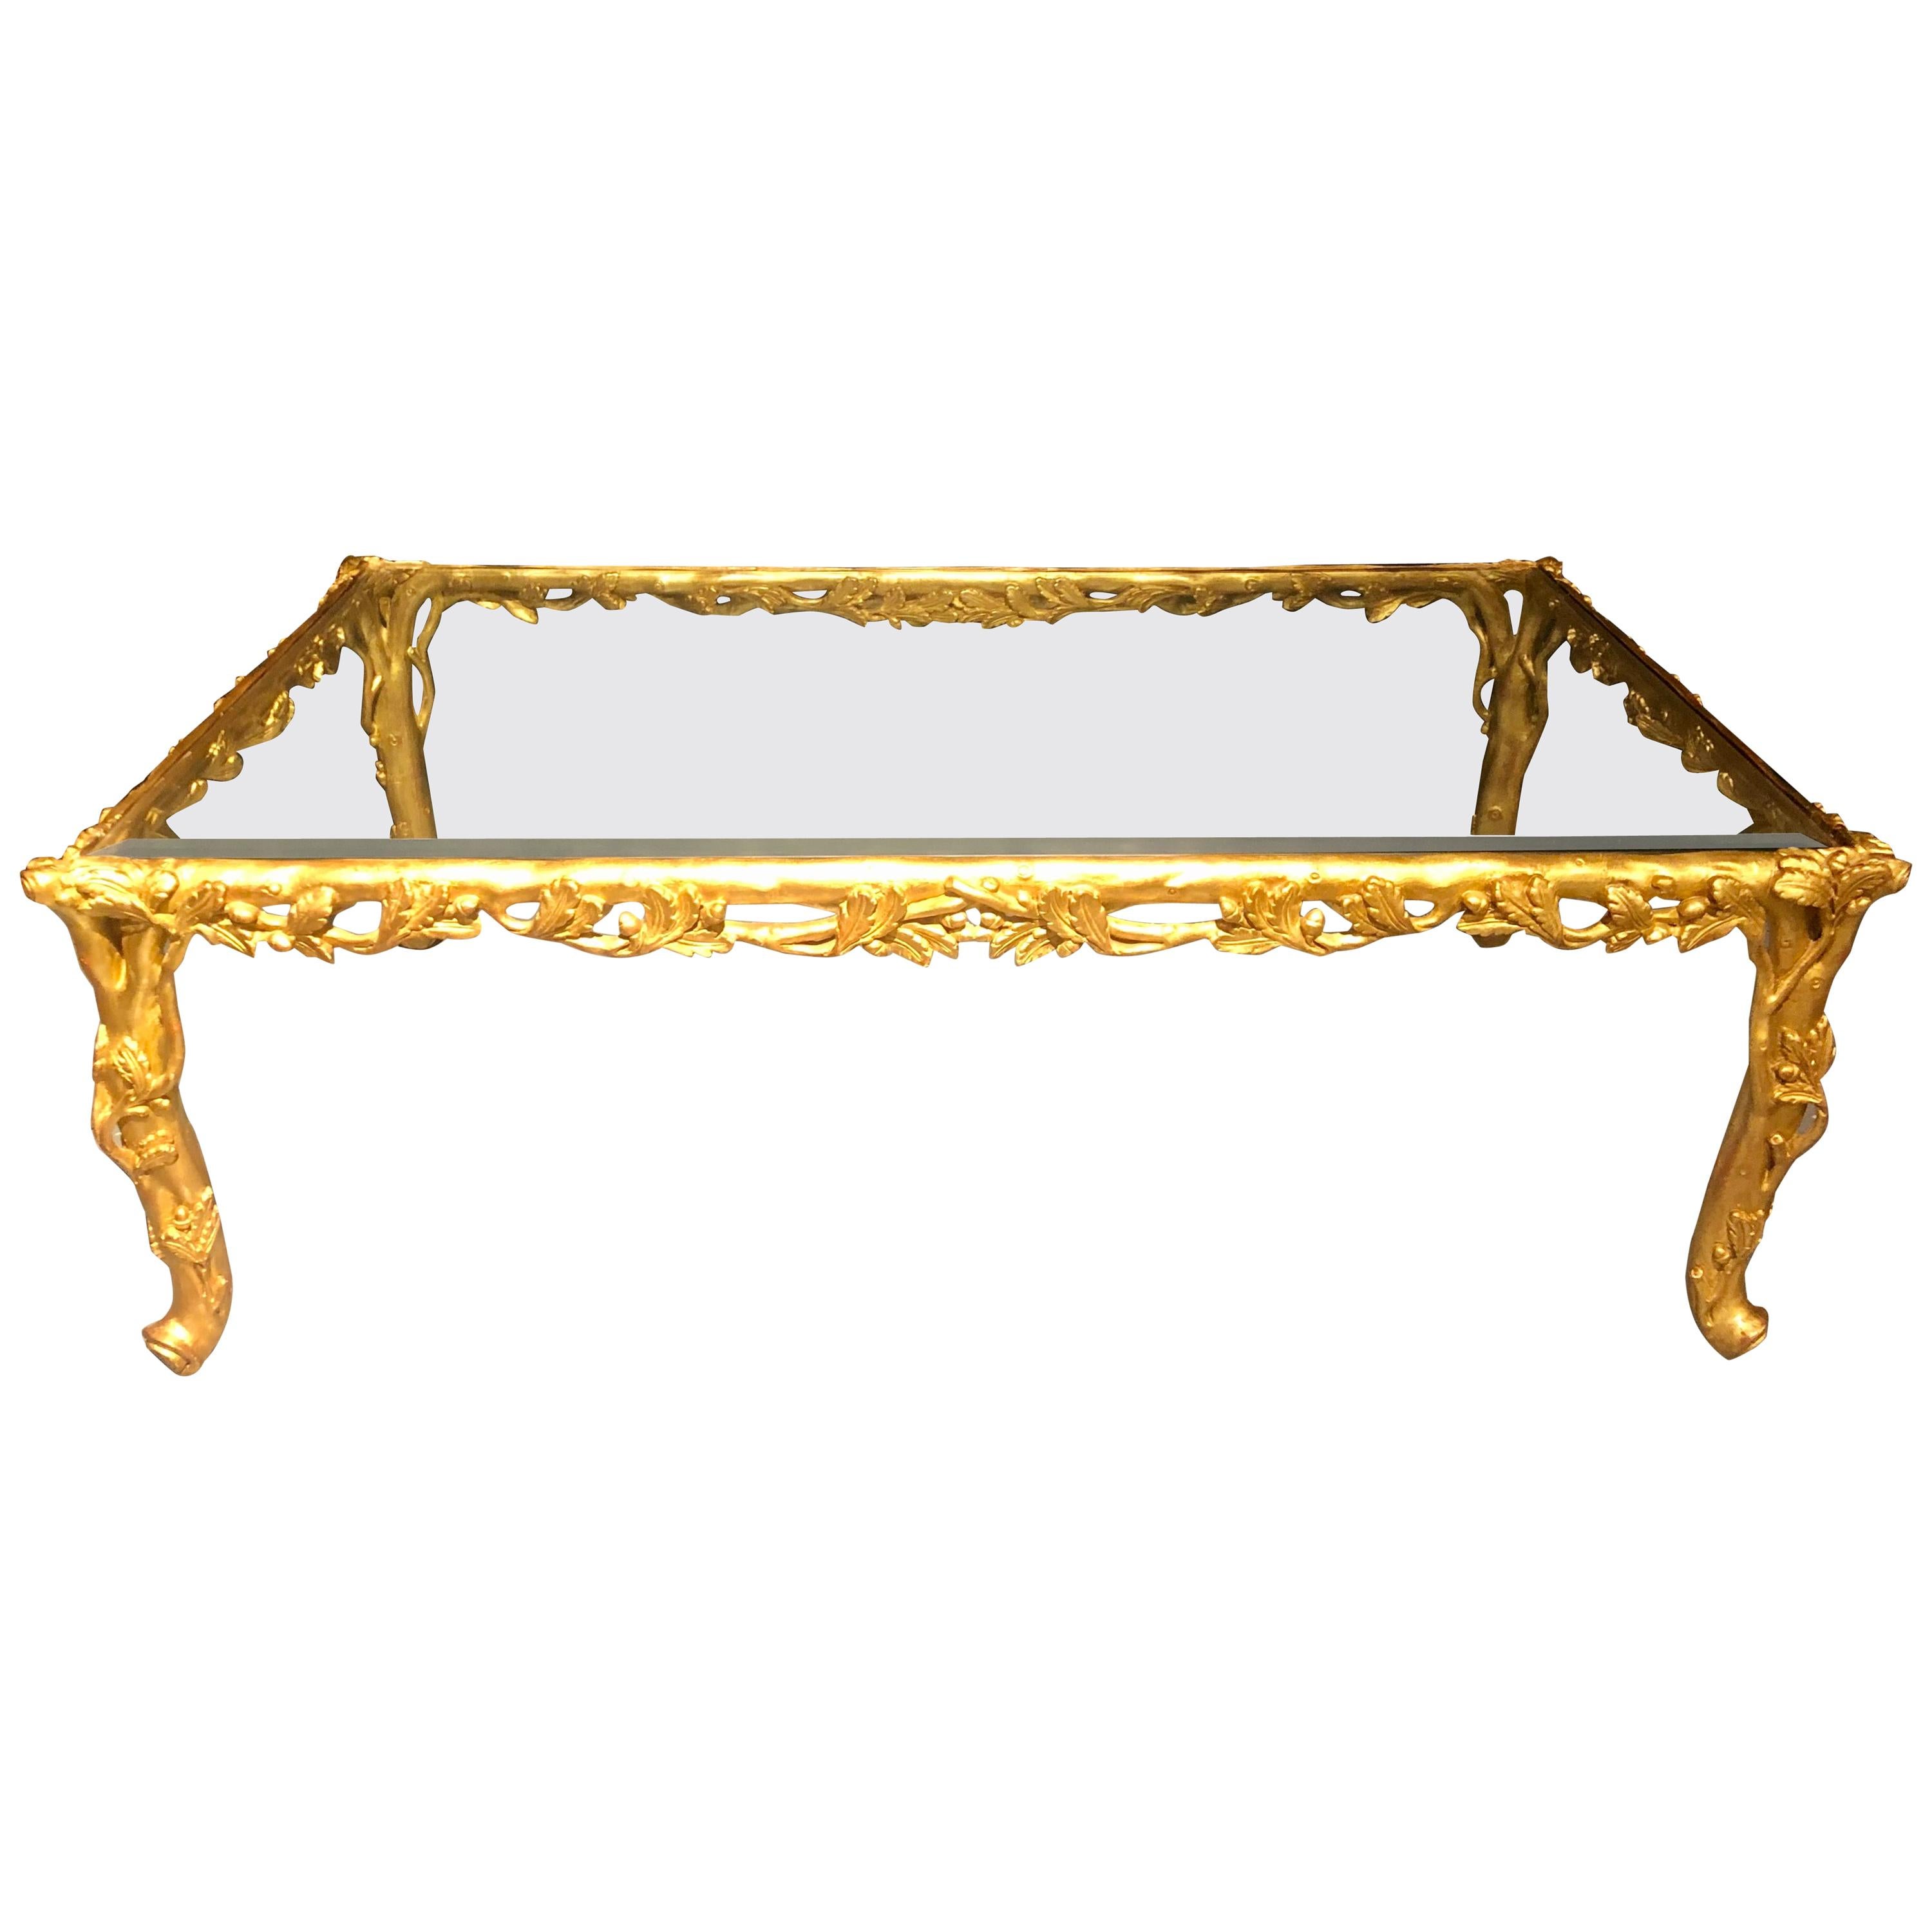 Hollywood Regency Style Giltwood Coffee Table, Beveled Glass Top